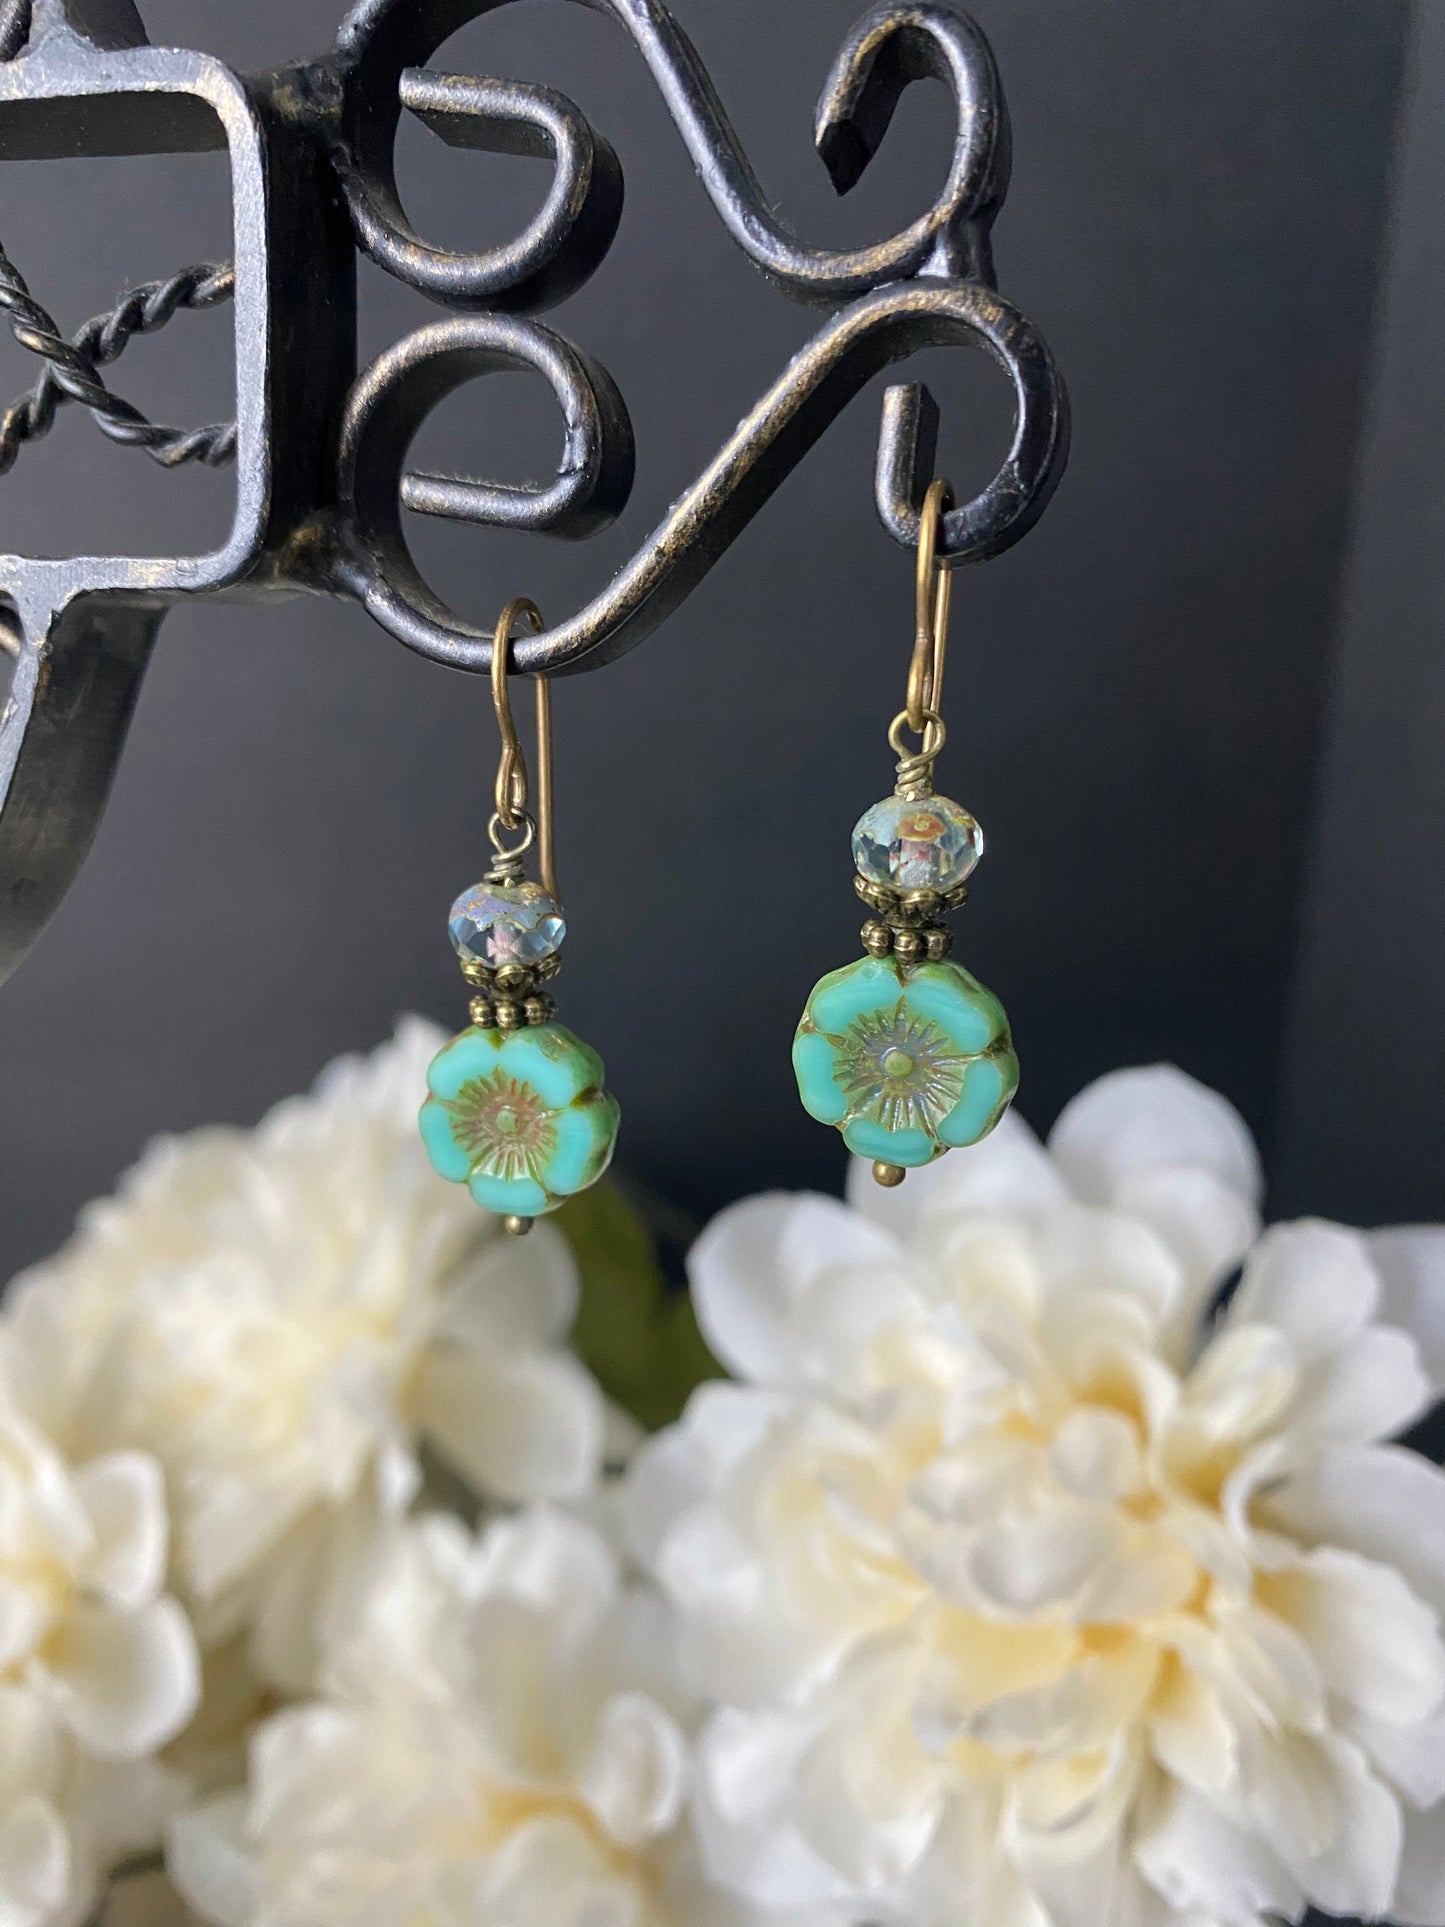 Teal Flower Czech glass, picssso glass, small earrings, and copper metal earrings. - Andria Bieber Designs 